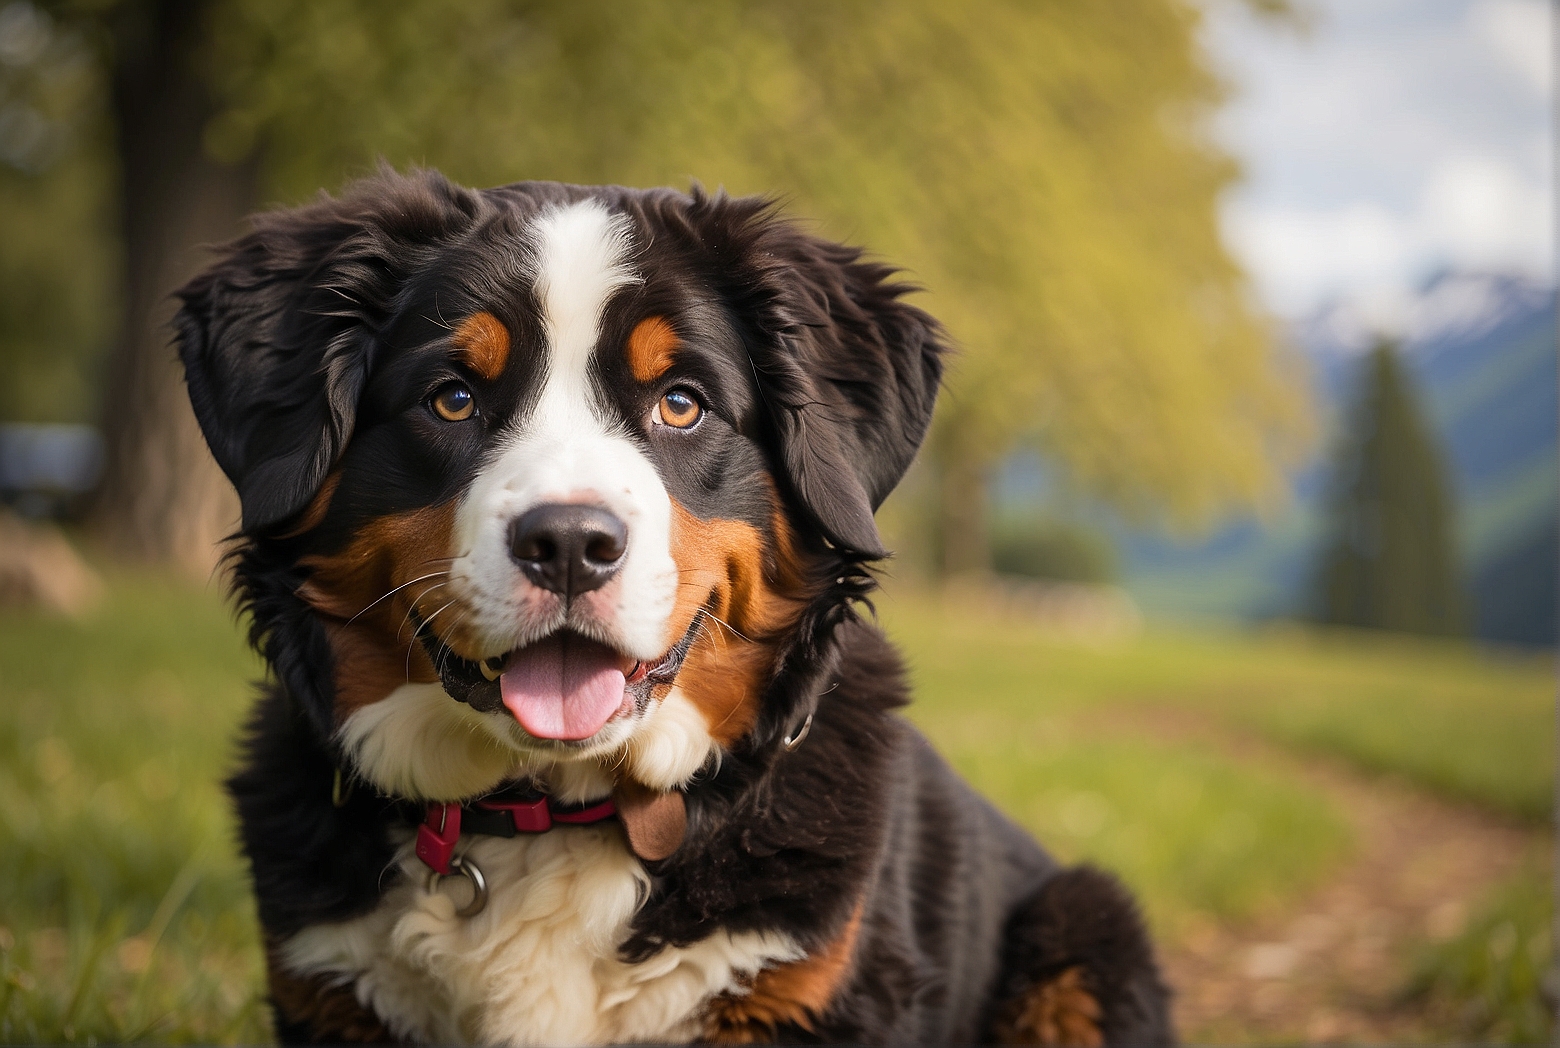 How Much Does a Trained Bernese Mountain Dog Cost?